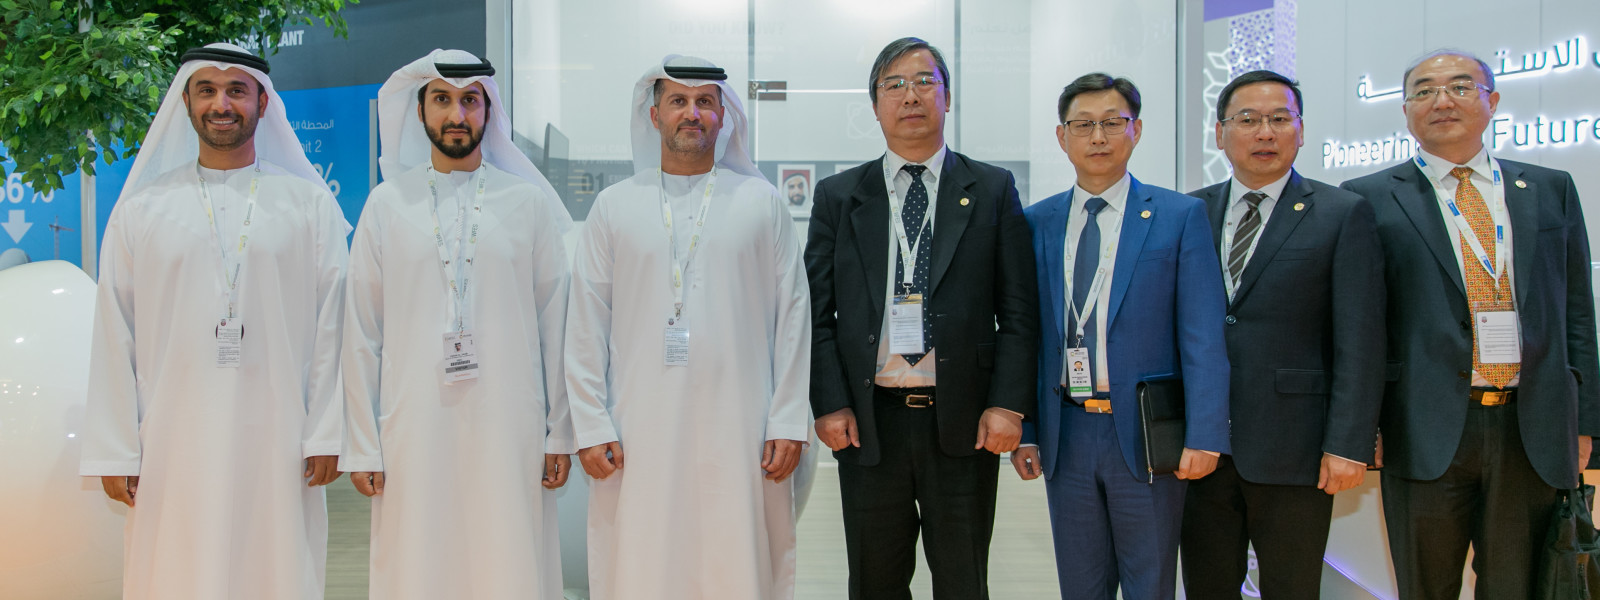 enec-particpation-in-wfes2019-5d35829757402.jpg (Gallery Image)